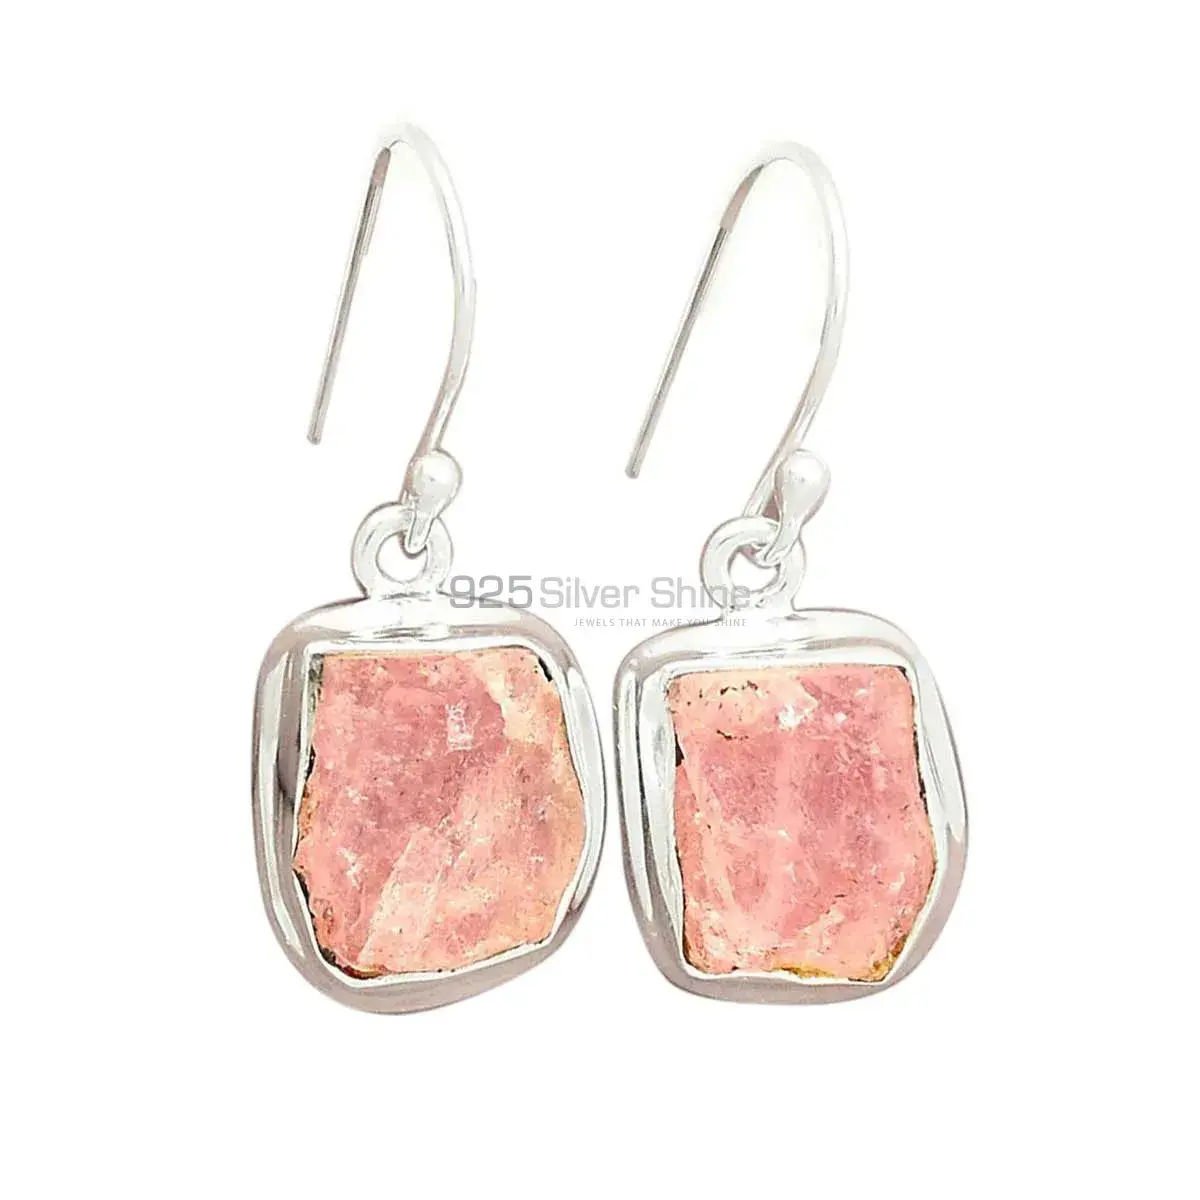 Natural Rose Quartz Gemstone Earrings Suppliers In 925 Sterling Silver Jewelry 925SE2287